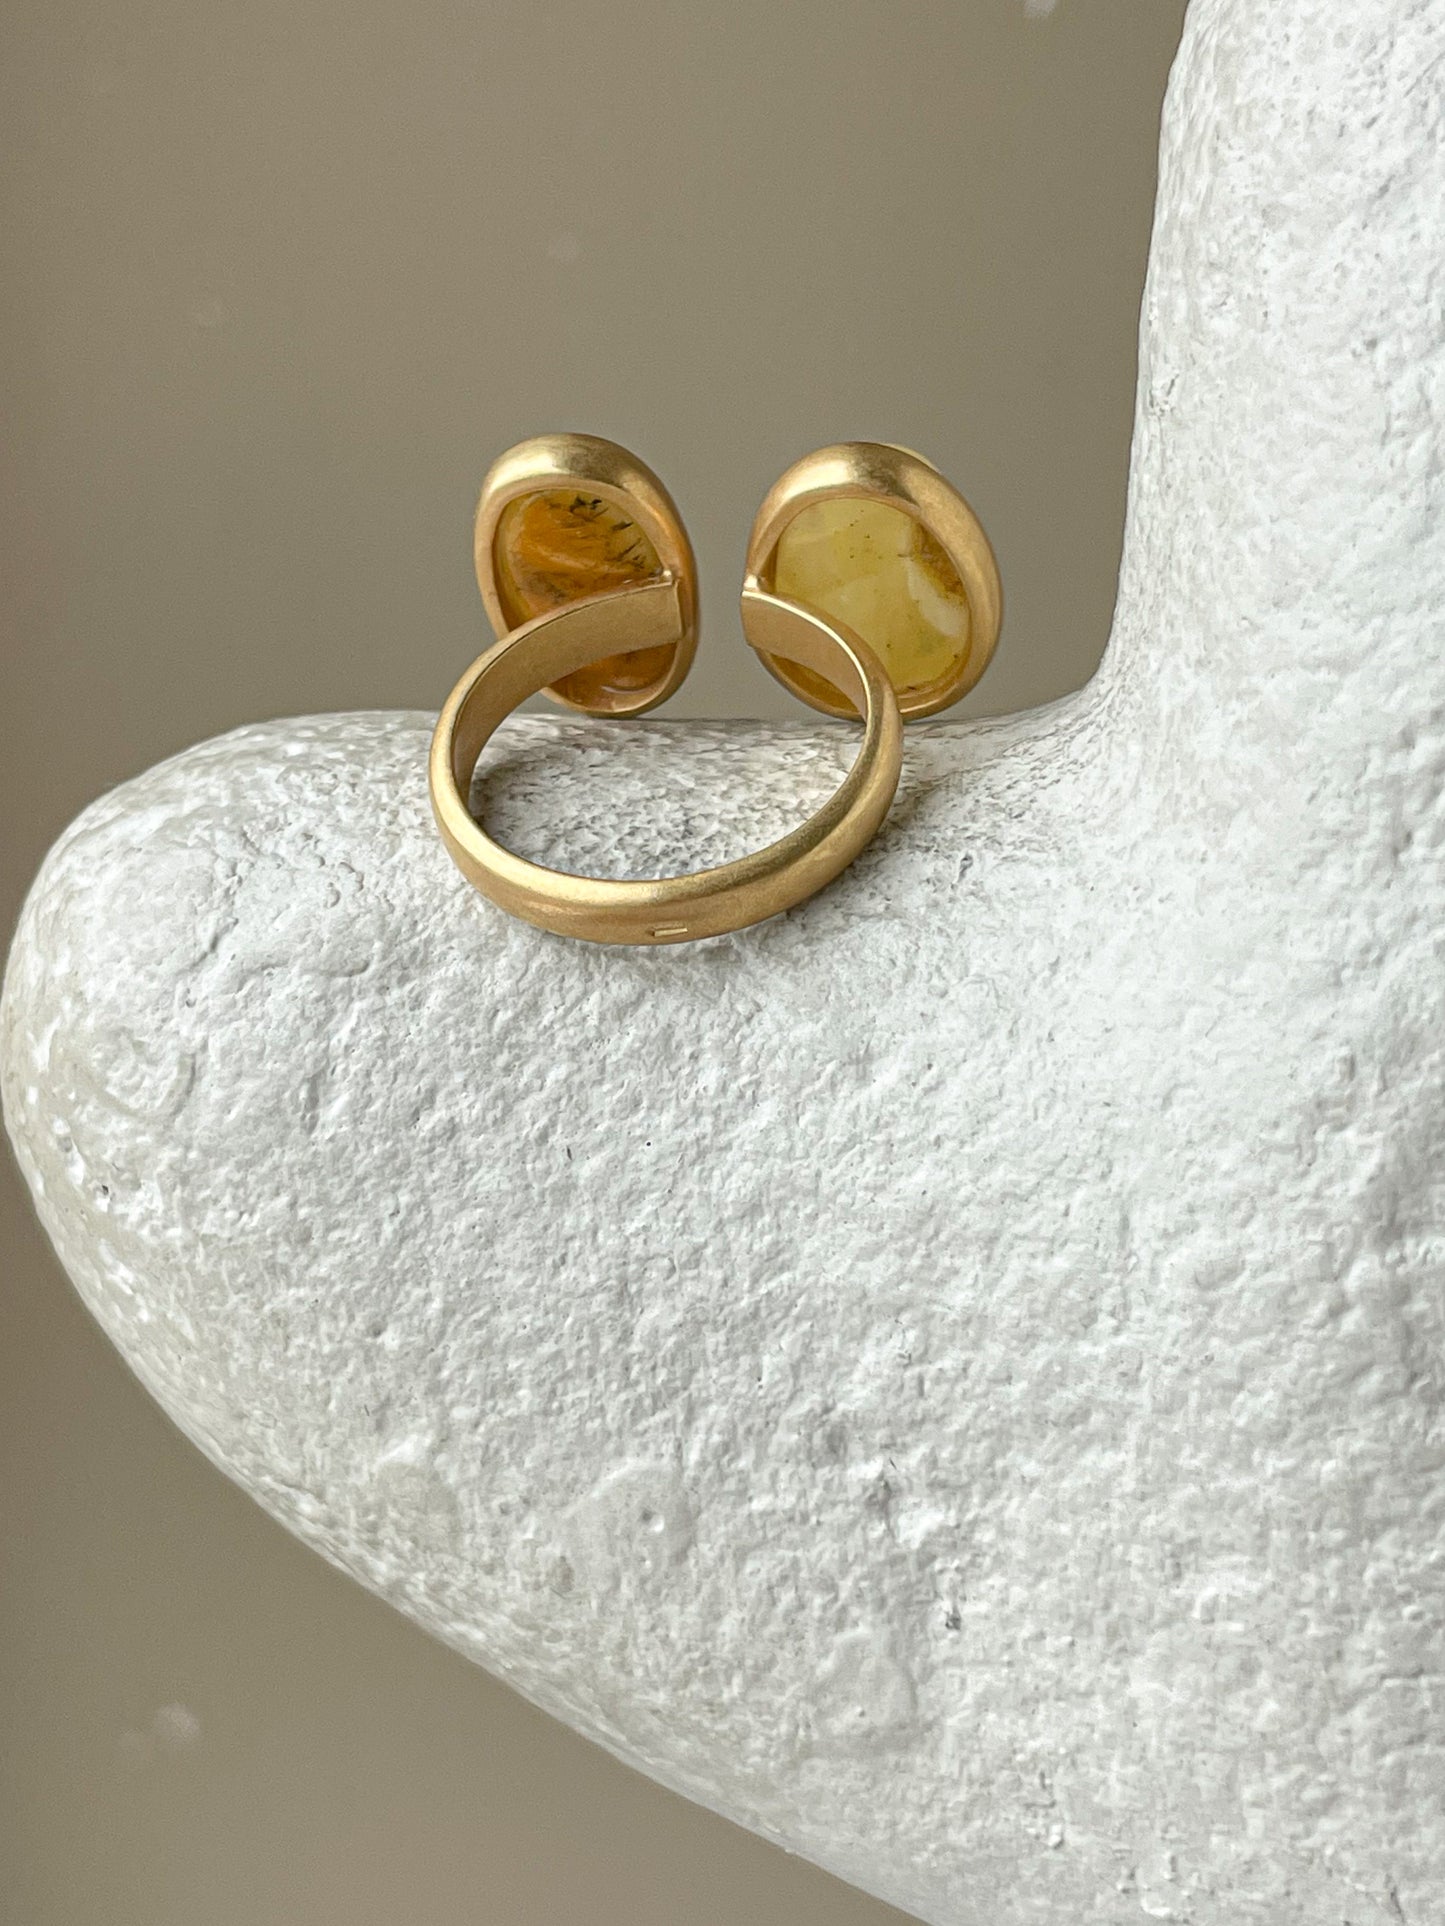 Matte amber ring- Gold plated silver - Double stone ring collection - Size 7 3/4